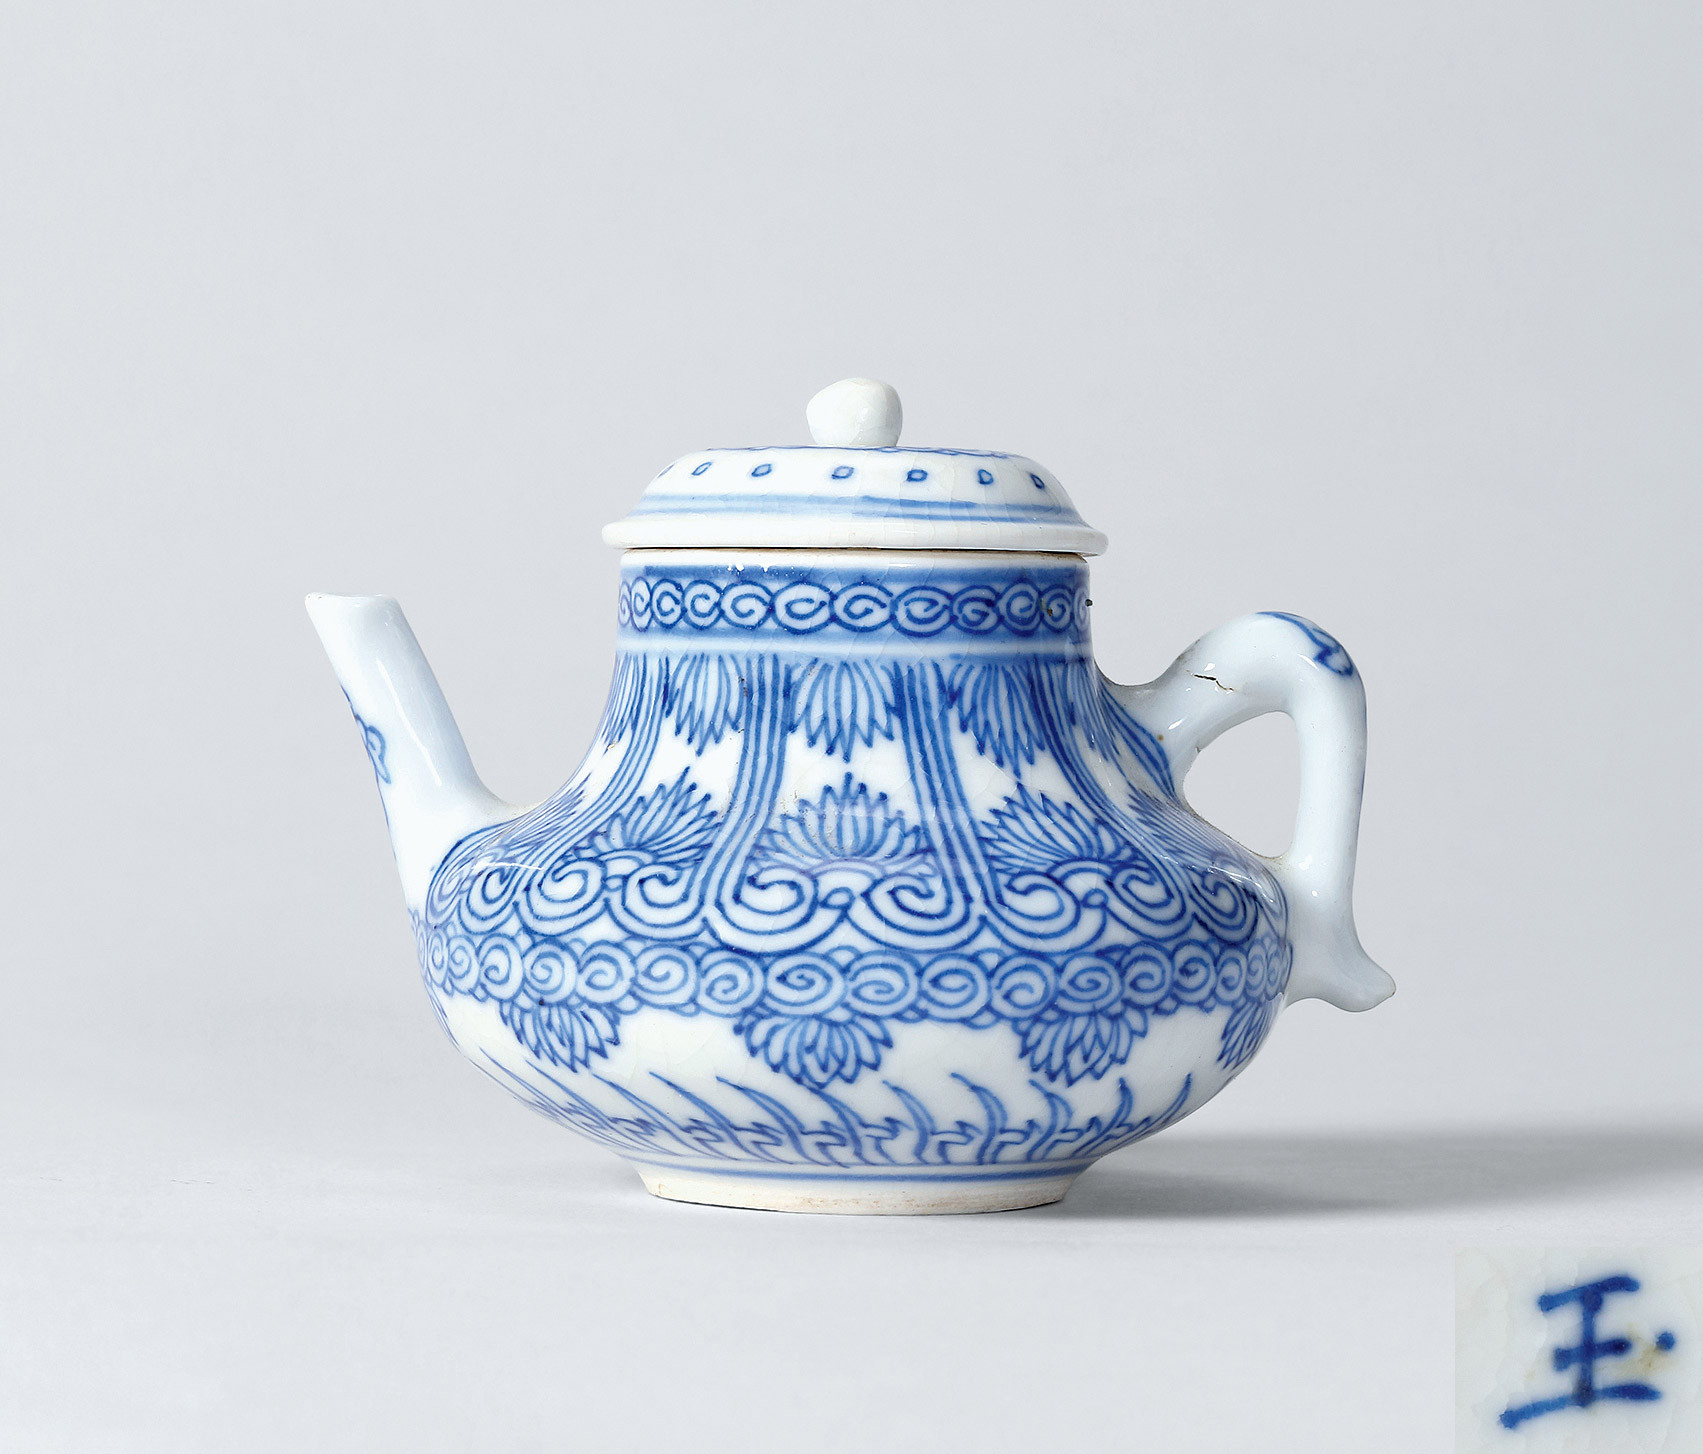 A BLUE AND WHITE EWER WITH HANDLE AT A SIDE WITH FLOWER DESIGN